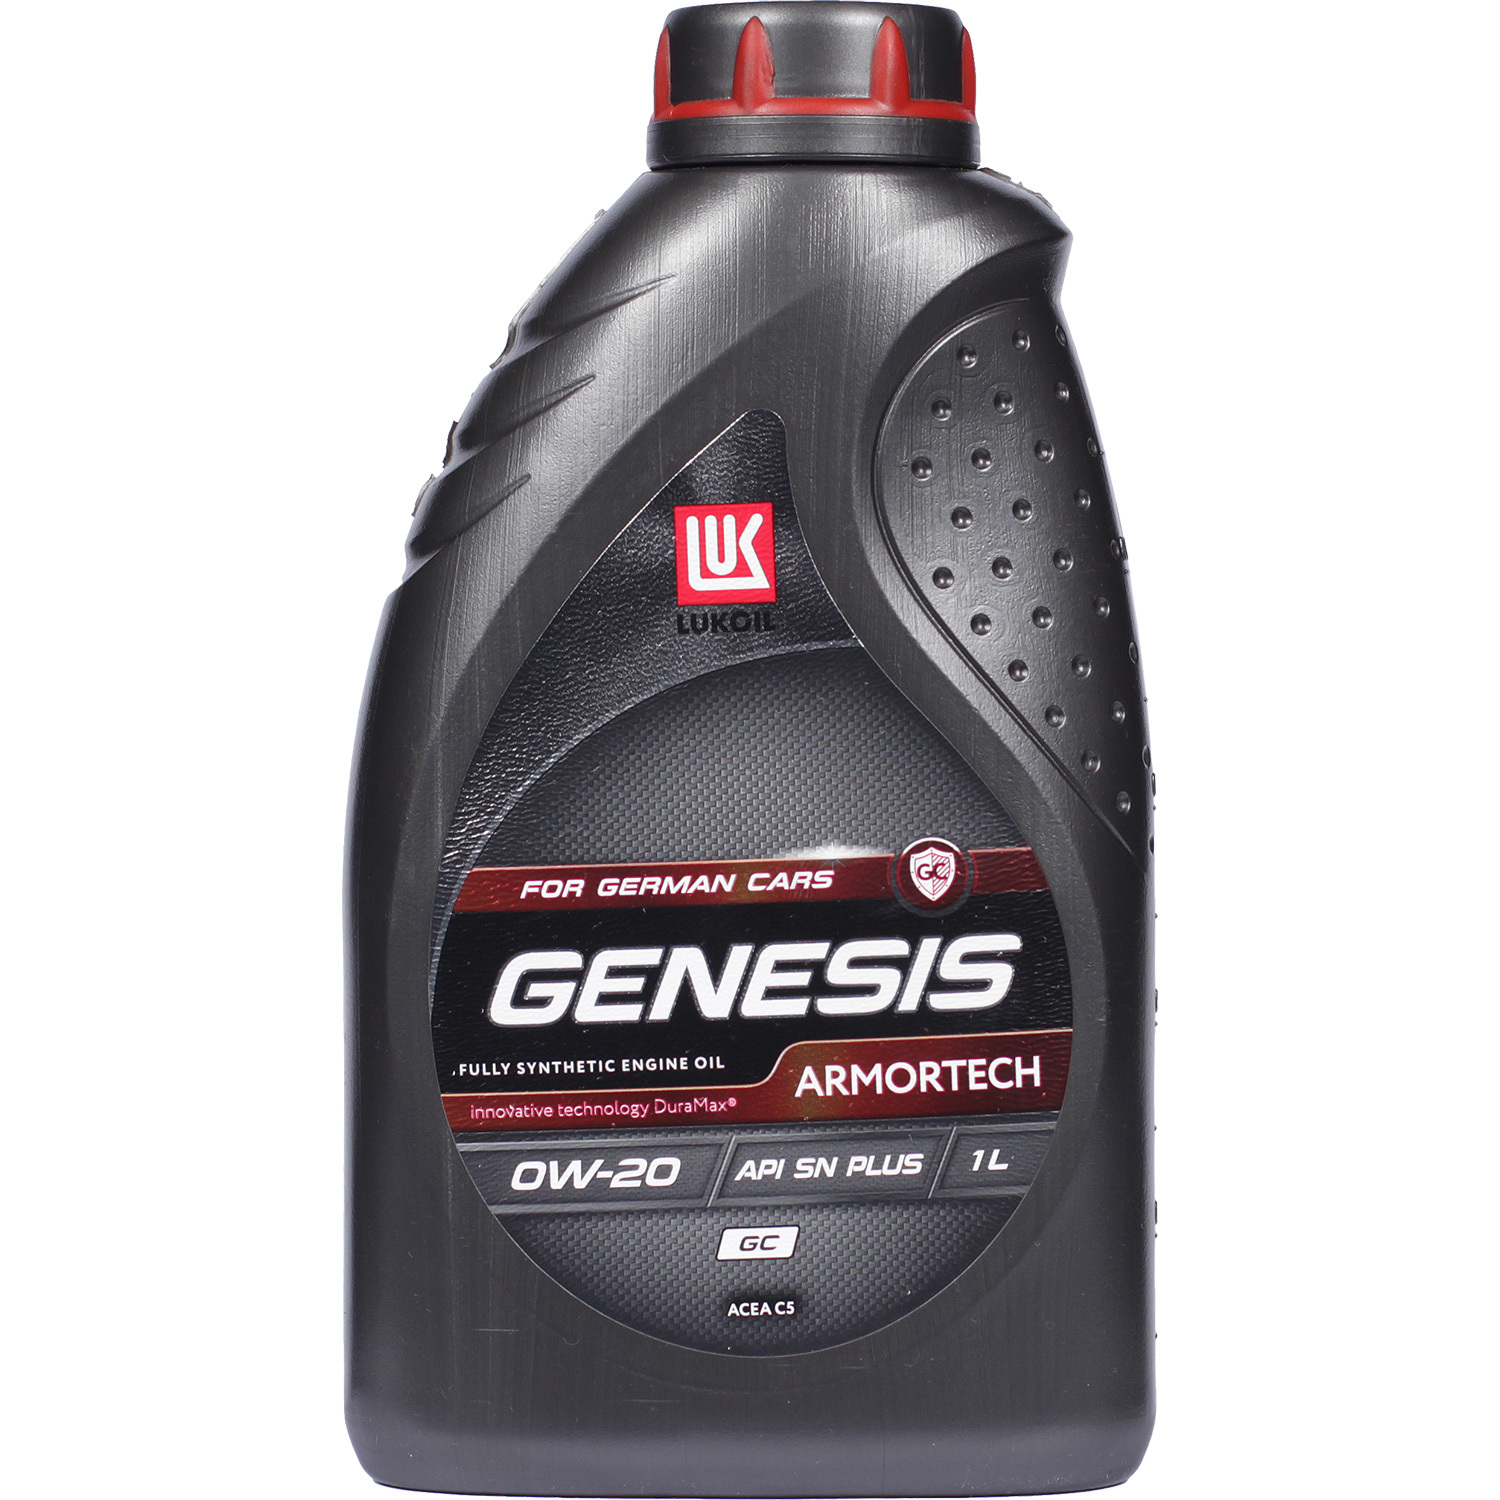 Lukoil Моторное масло Lukoil Genesis Armortech GC 0W-20, 1 л lukoil моторное масло lukoil genesis armortech jp 0w 30 1 л